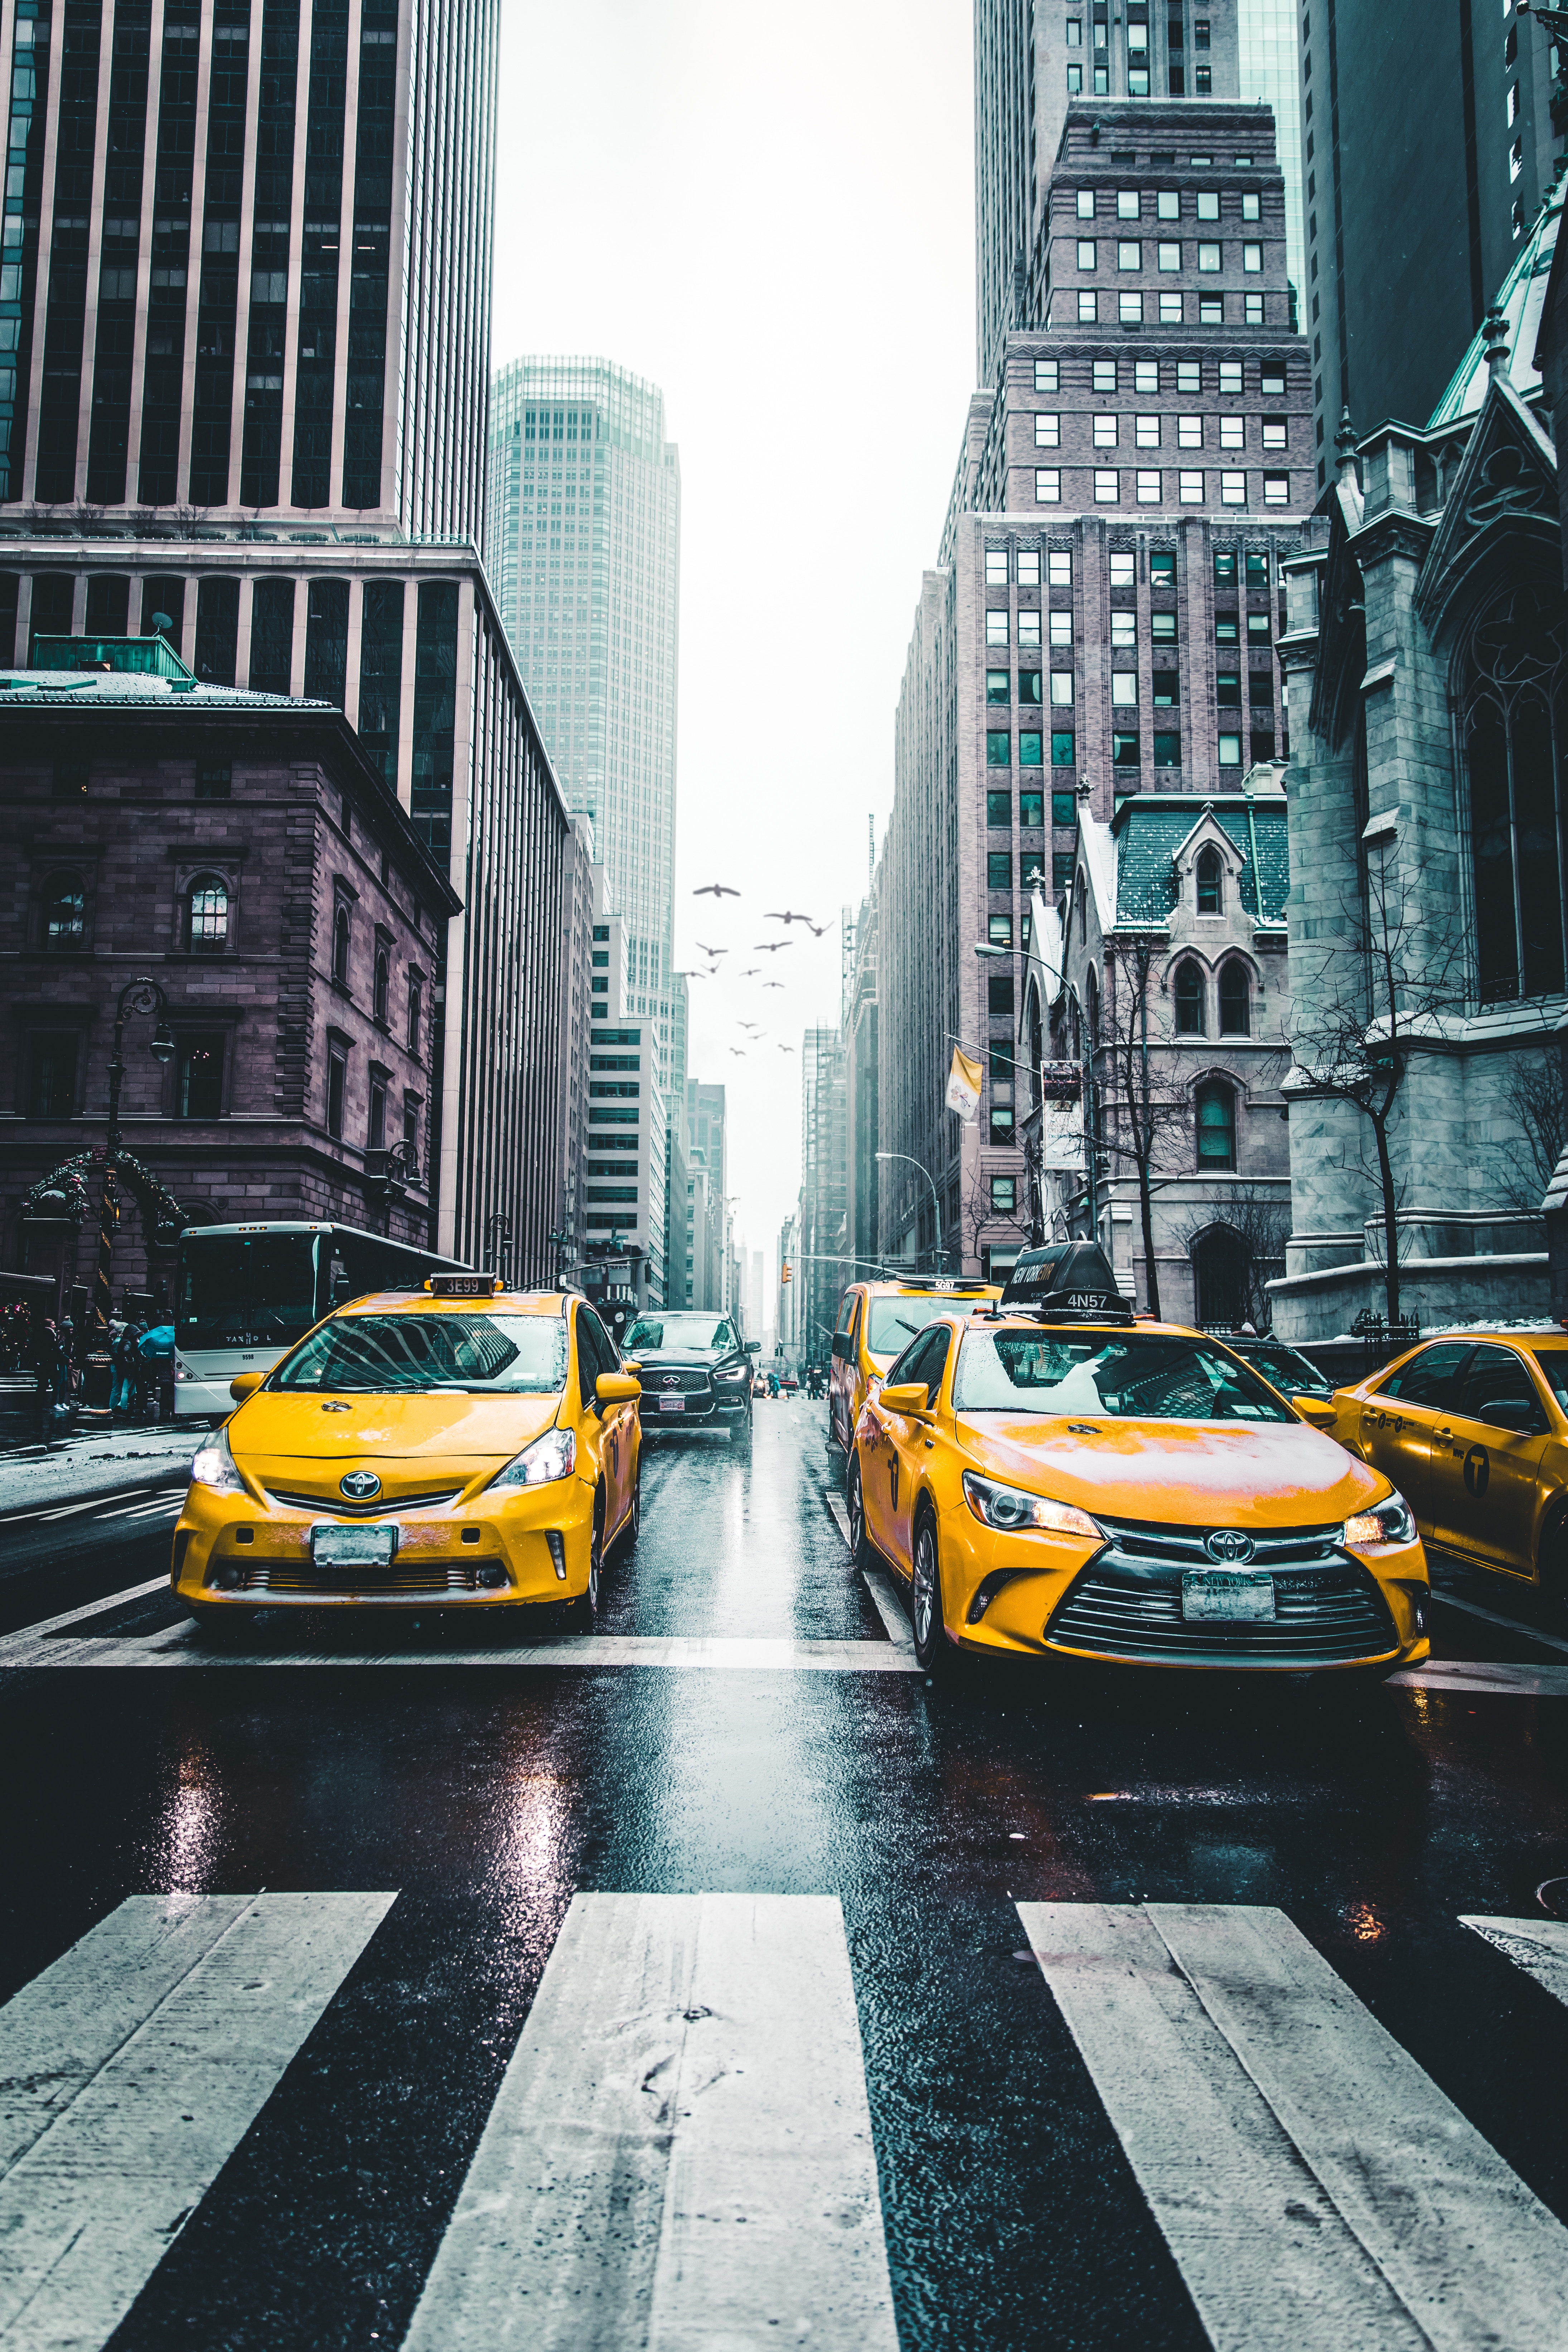 Best Mobile Taxi Backgrounds